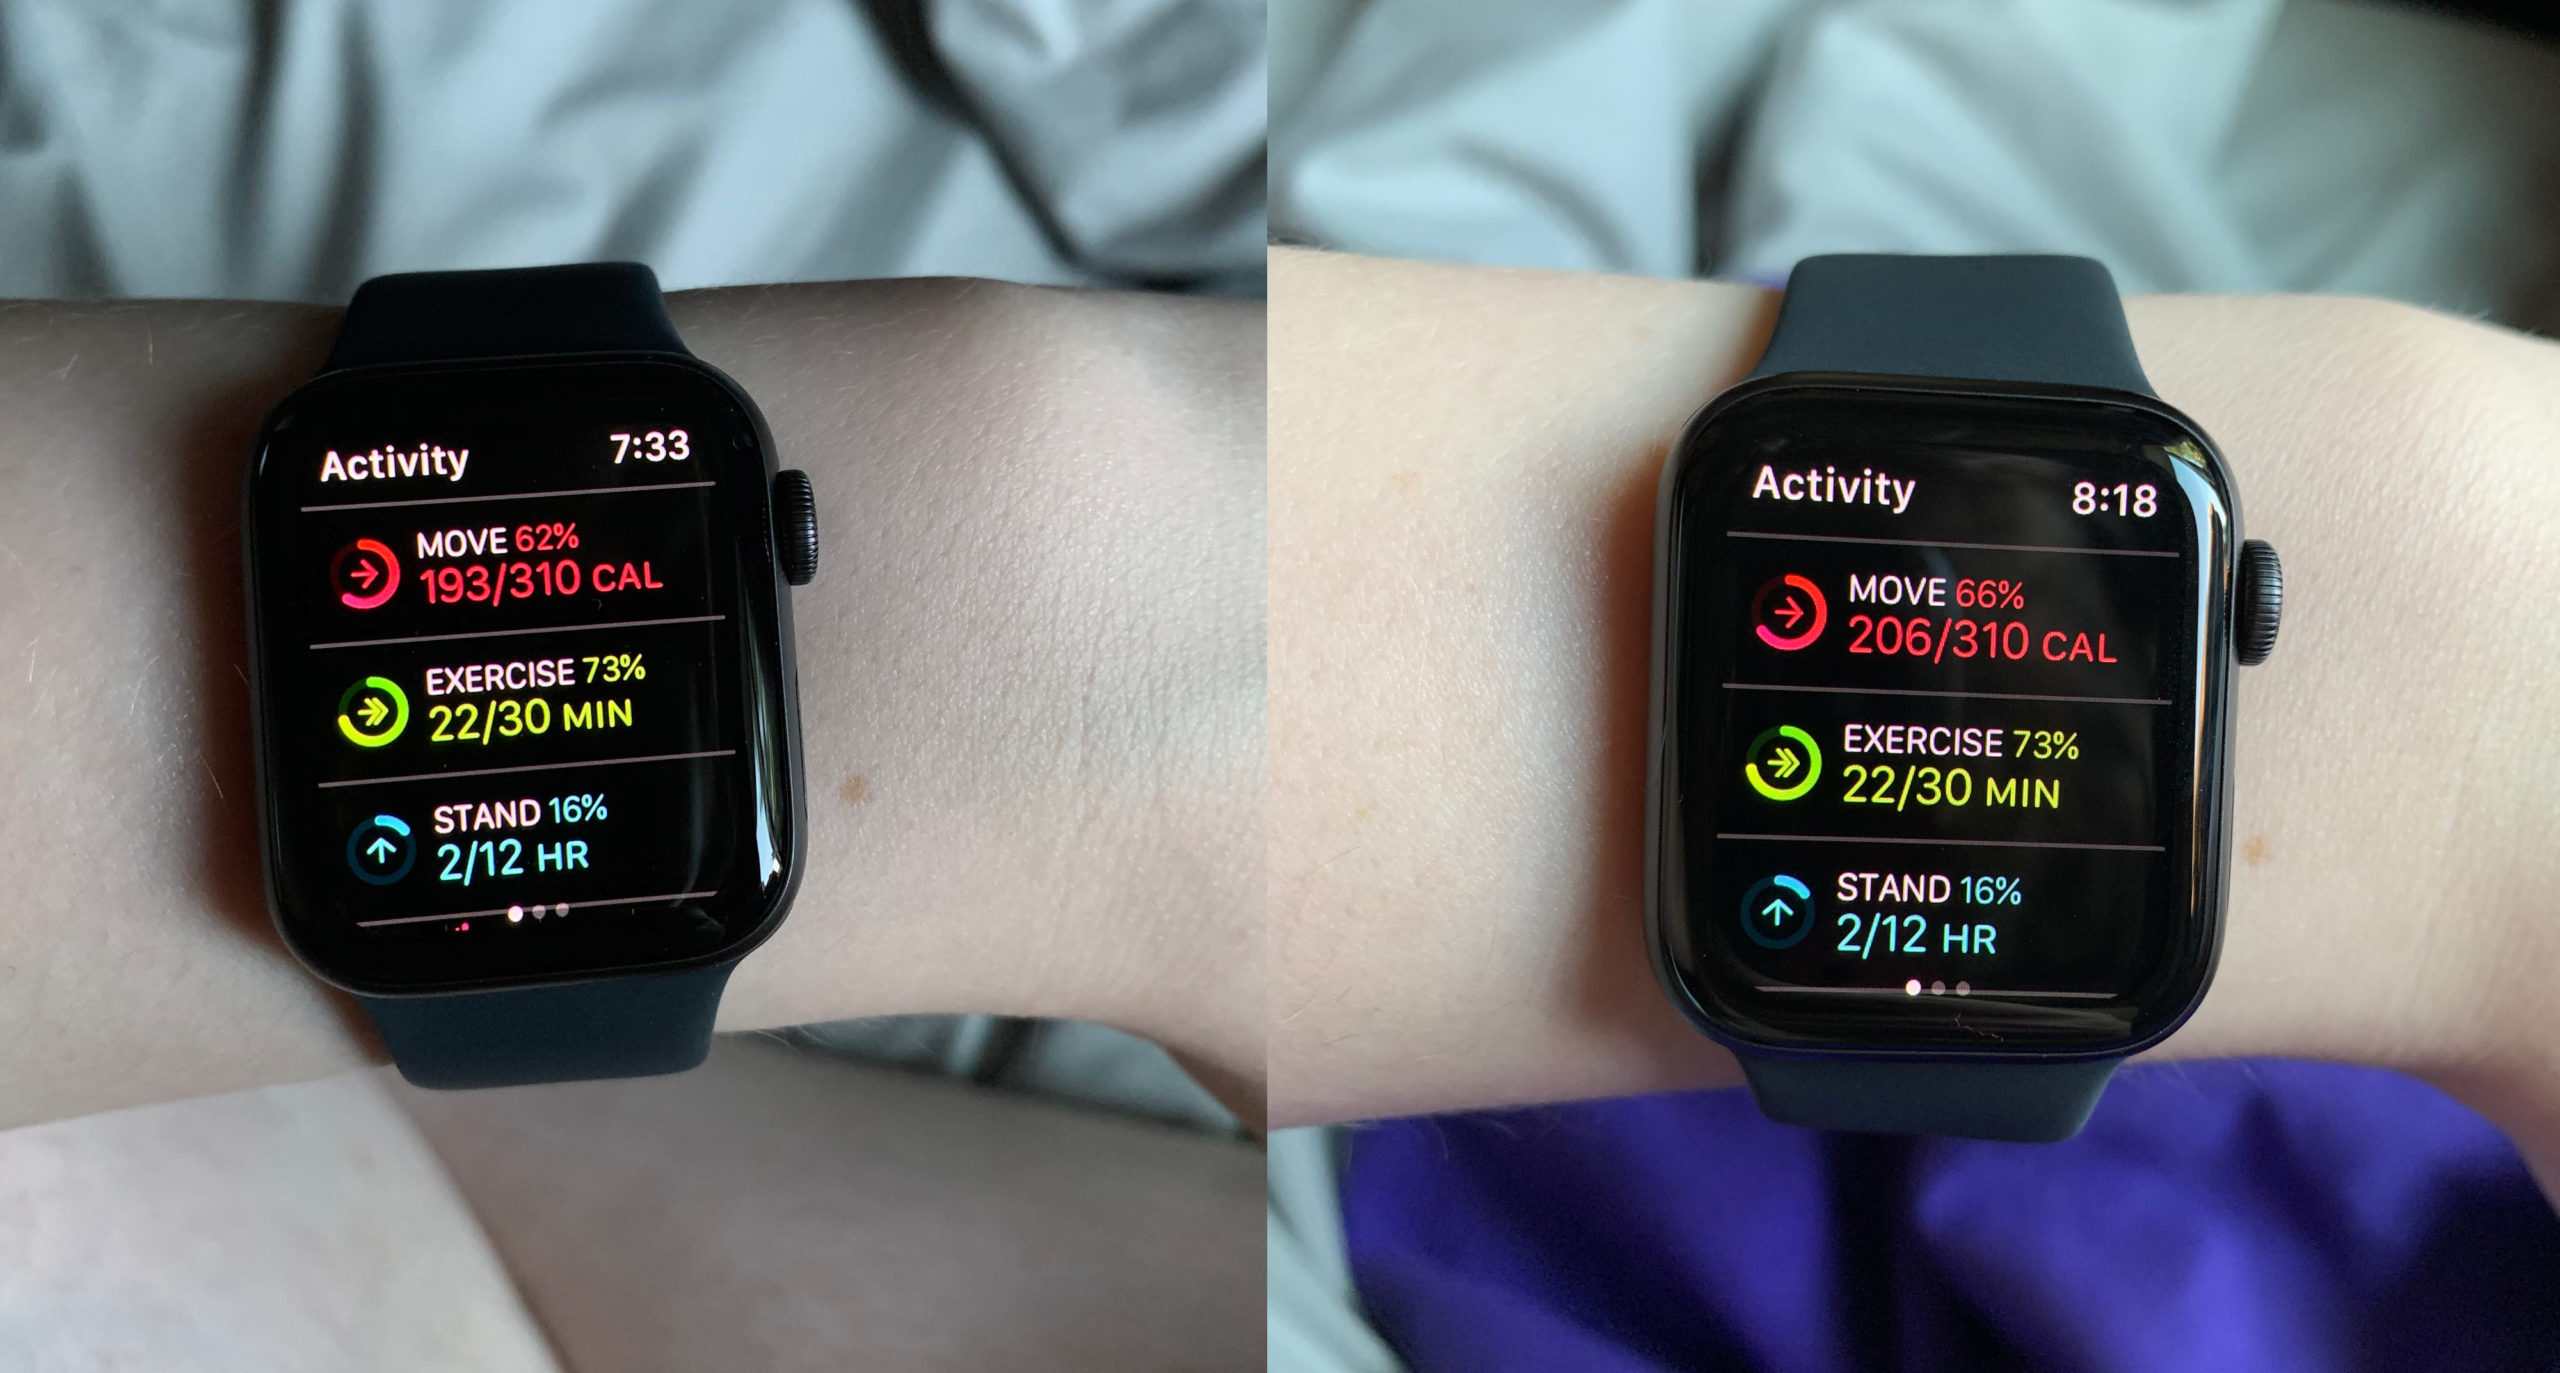 Privacy Rights Apple Watch Tracks Activity During pic